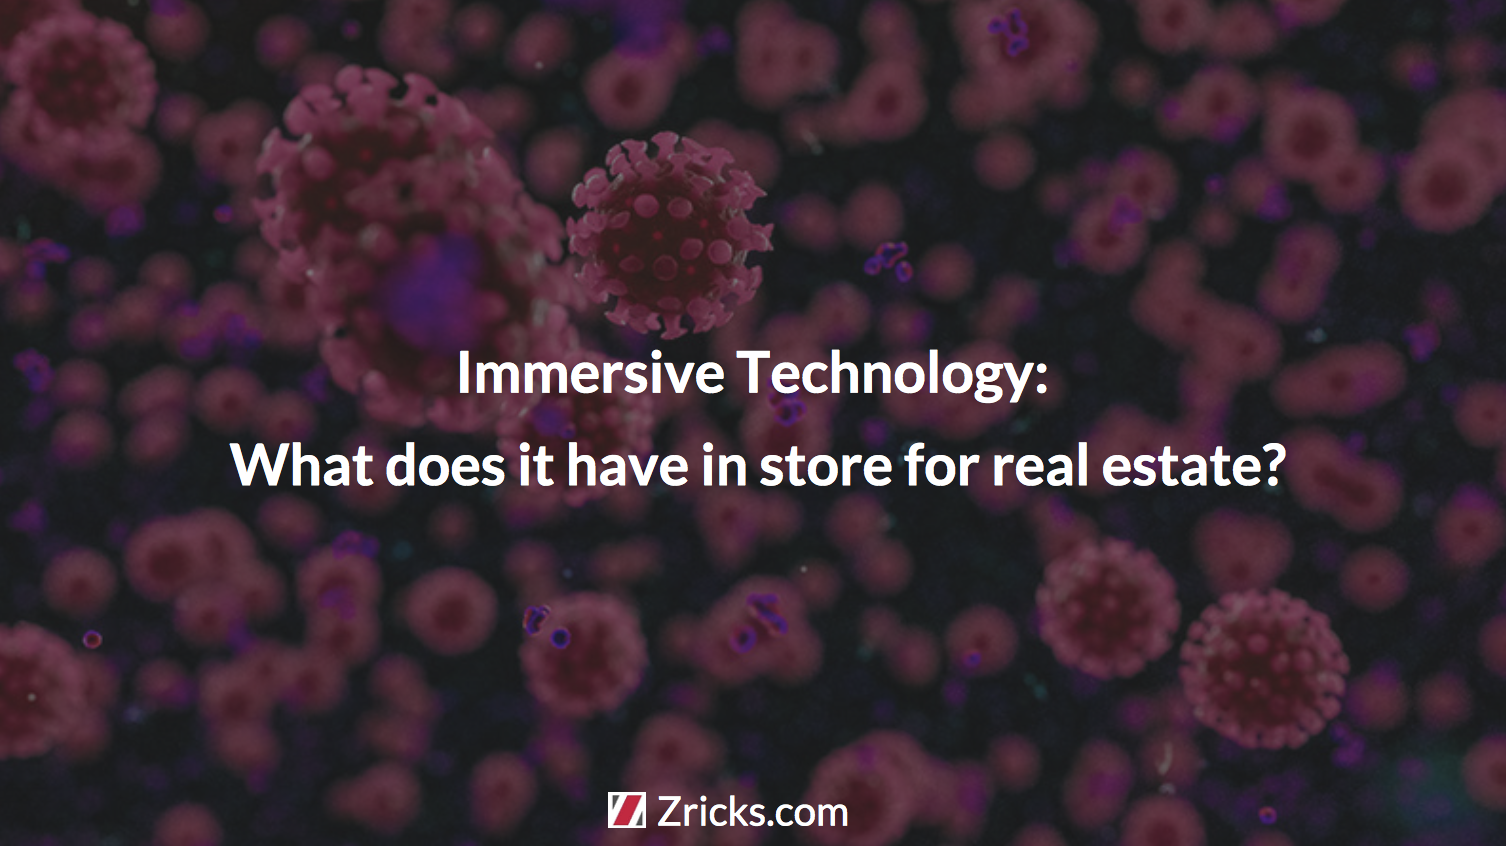 Immersive Technology: What does it have in store for real estate? Update